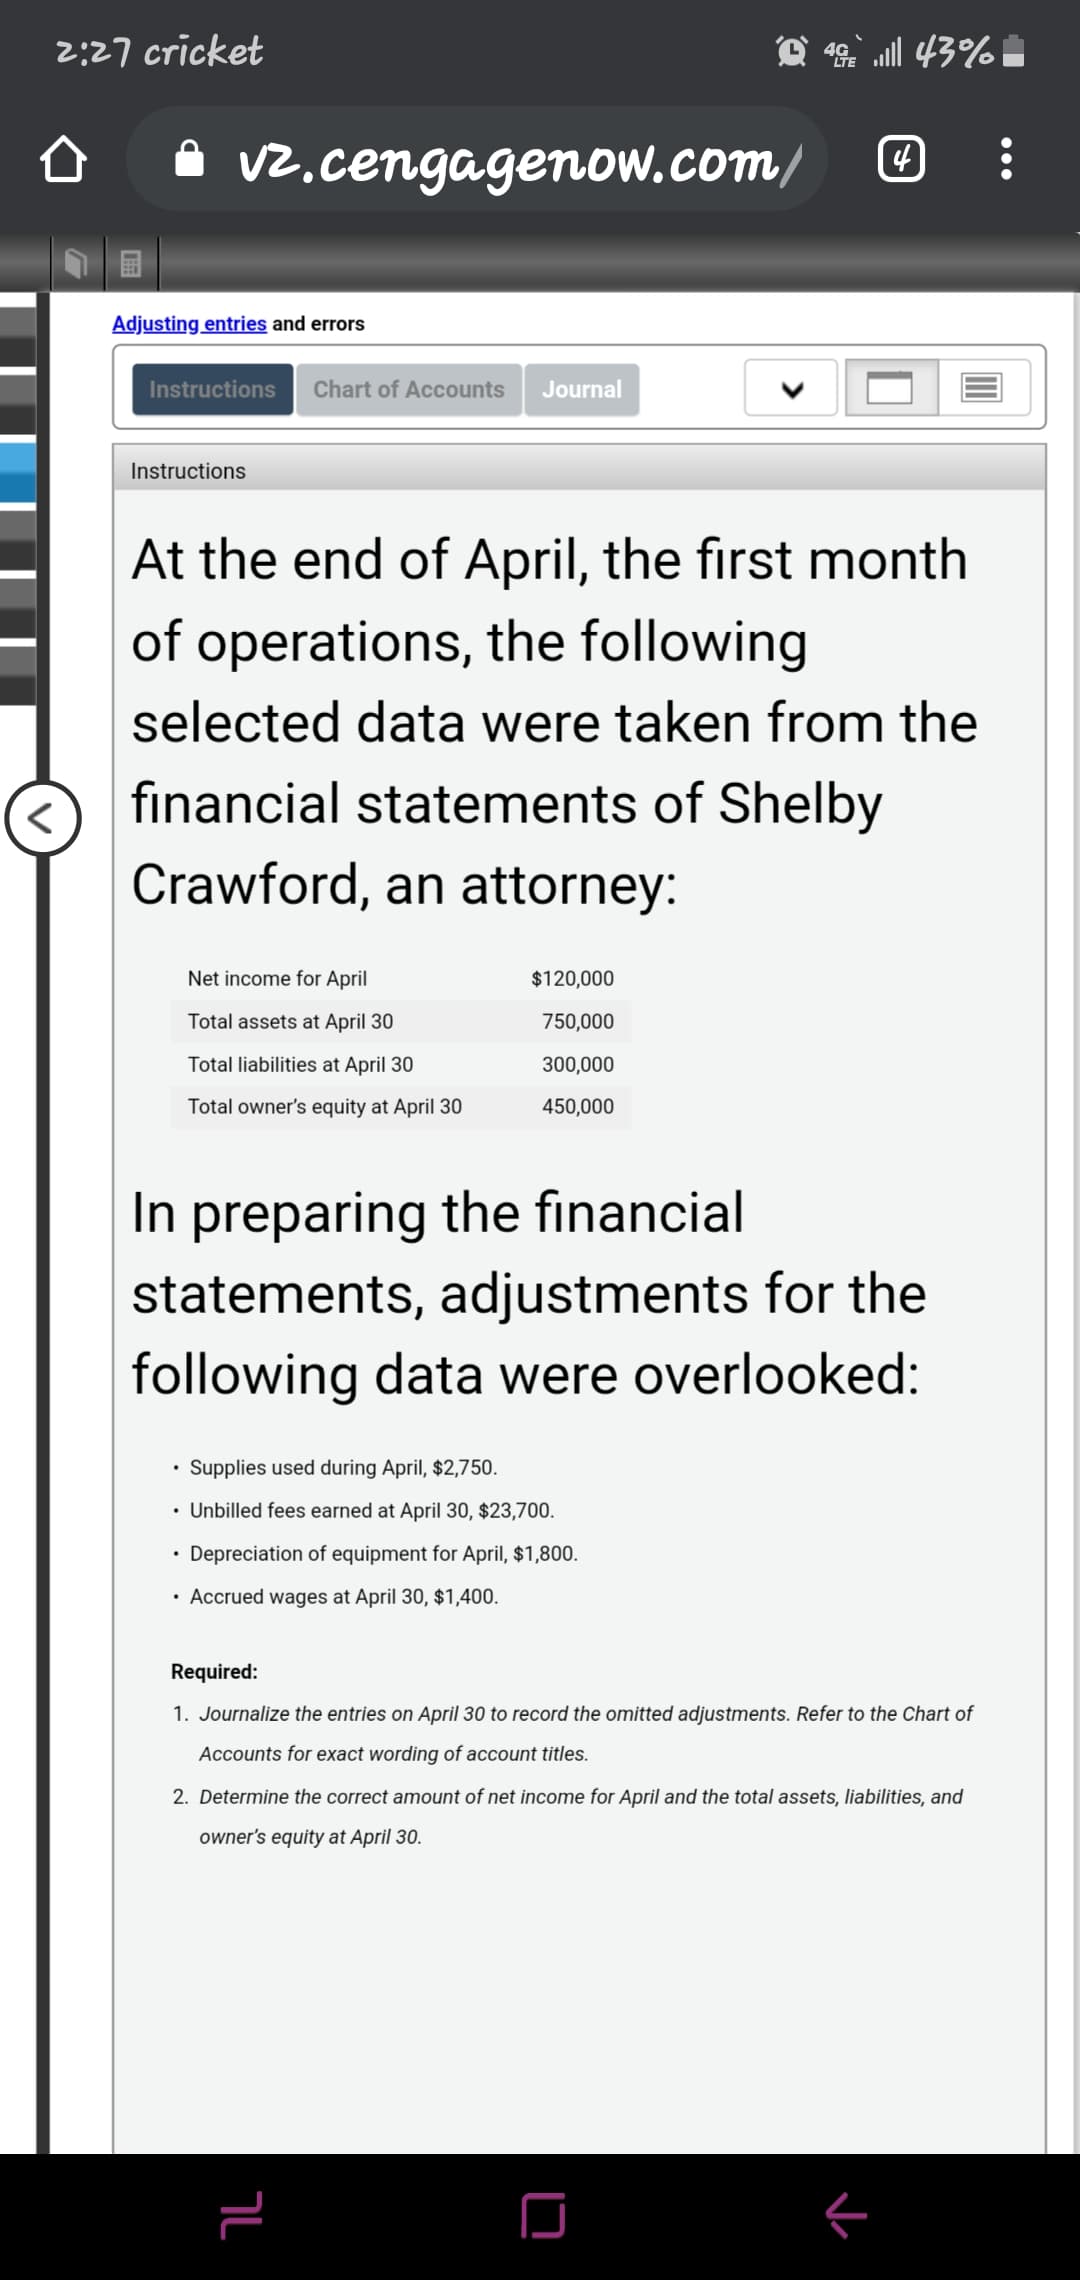 2:27 cricket
• v2.cengagenow.com/
Adjusting entries and errors
Instructions Chart of Accounts
Journal
Instructions
At the end of April, the first month
of operations, the following
selected data were taken from the
く
financial statements of Shelby
Crawford, an attorney:
Net income for April
$120,000
Total assets at April 30
750,000
Total liabilities at April 30
300,000
Total owner's equity at April 30
450,000
In preparing the financial
statements, adjustments for the
following data were overlooked:
• Supplies used during April, $2,750.
• Unbilled fees earned at April 30, $23,700.
• Depreciation of equipment for April, $1,800.
• Accrued wages at April 30, $1,400.
Required:
1. Journalize the entries on April 30 to record the omitted adjustments. Refer to the Chart of
Accounts for exact wording of account titles.
2. Determine the correct amount of net income for April and the total assets, liabilities, and
owner's equity at April 30.
Lצ
